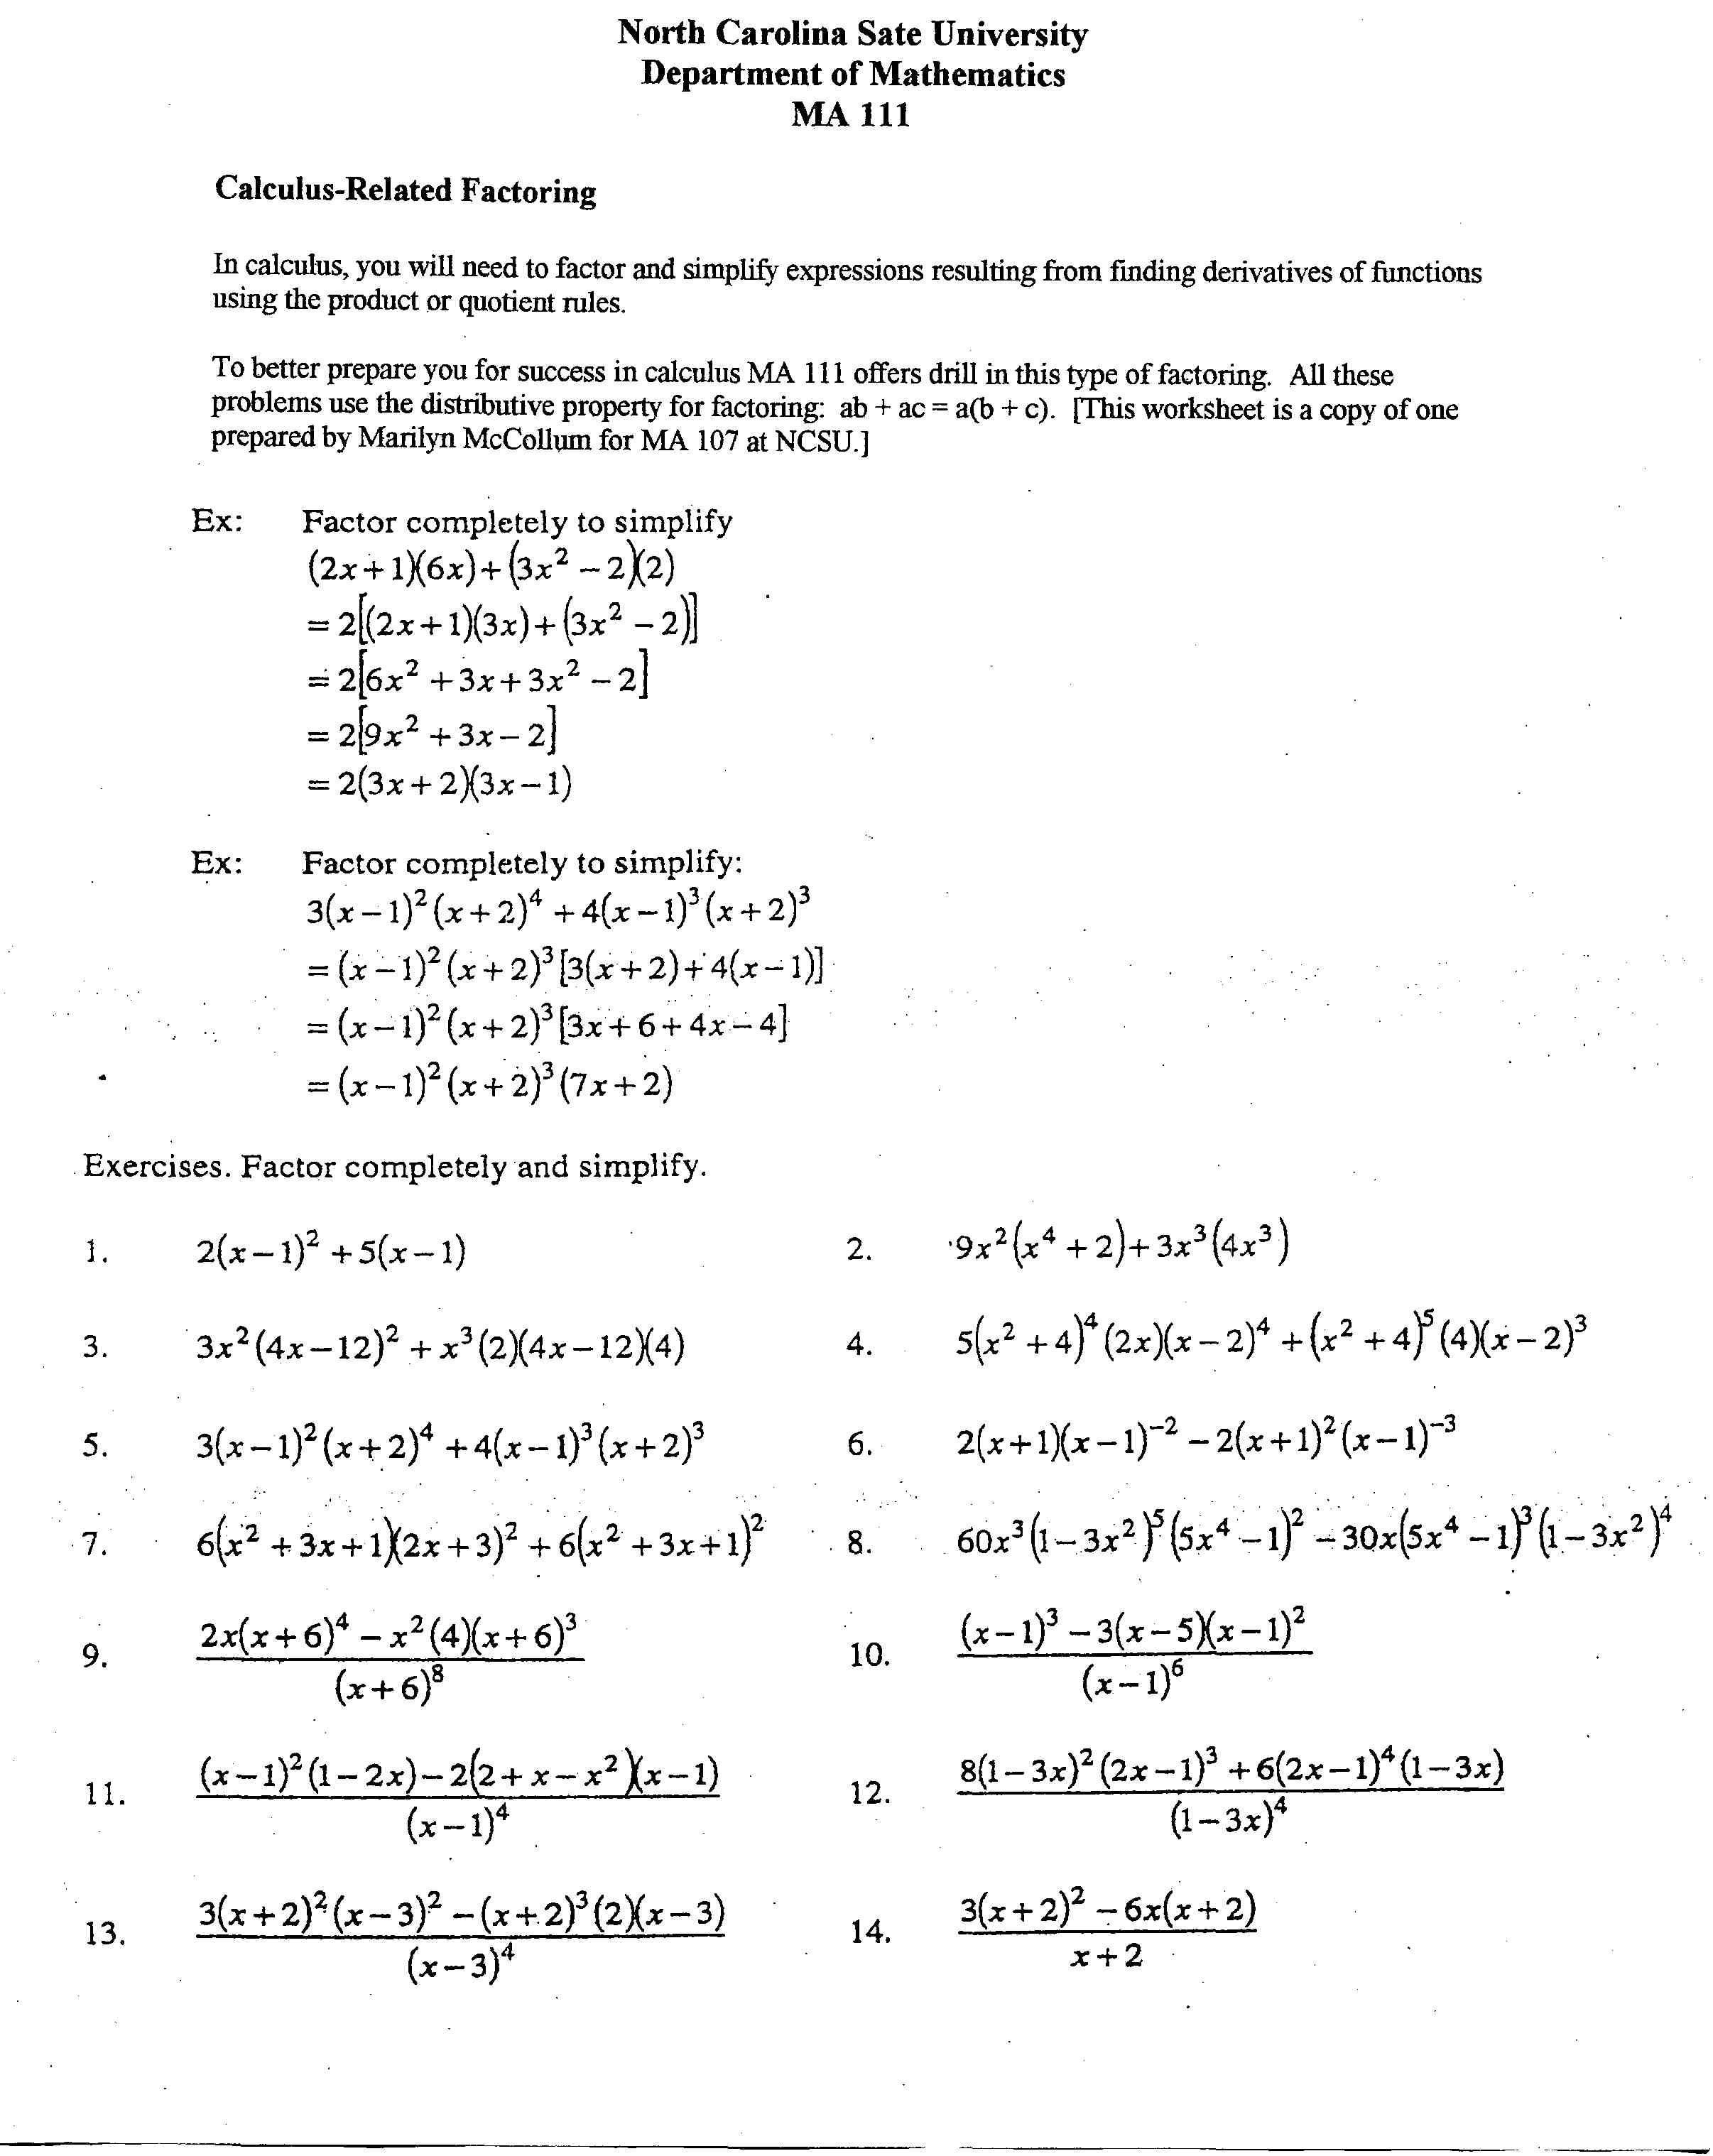 Factoring Using The Distributive Property Worksheet  Yooob In Factoring Using The Distributive Property Worksheet Answers